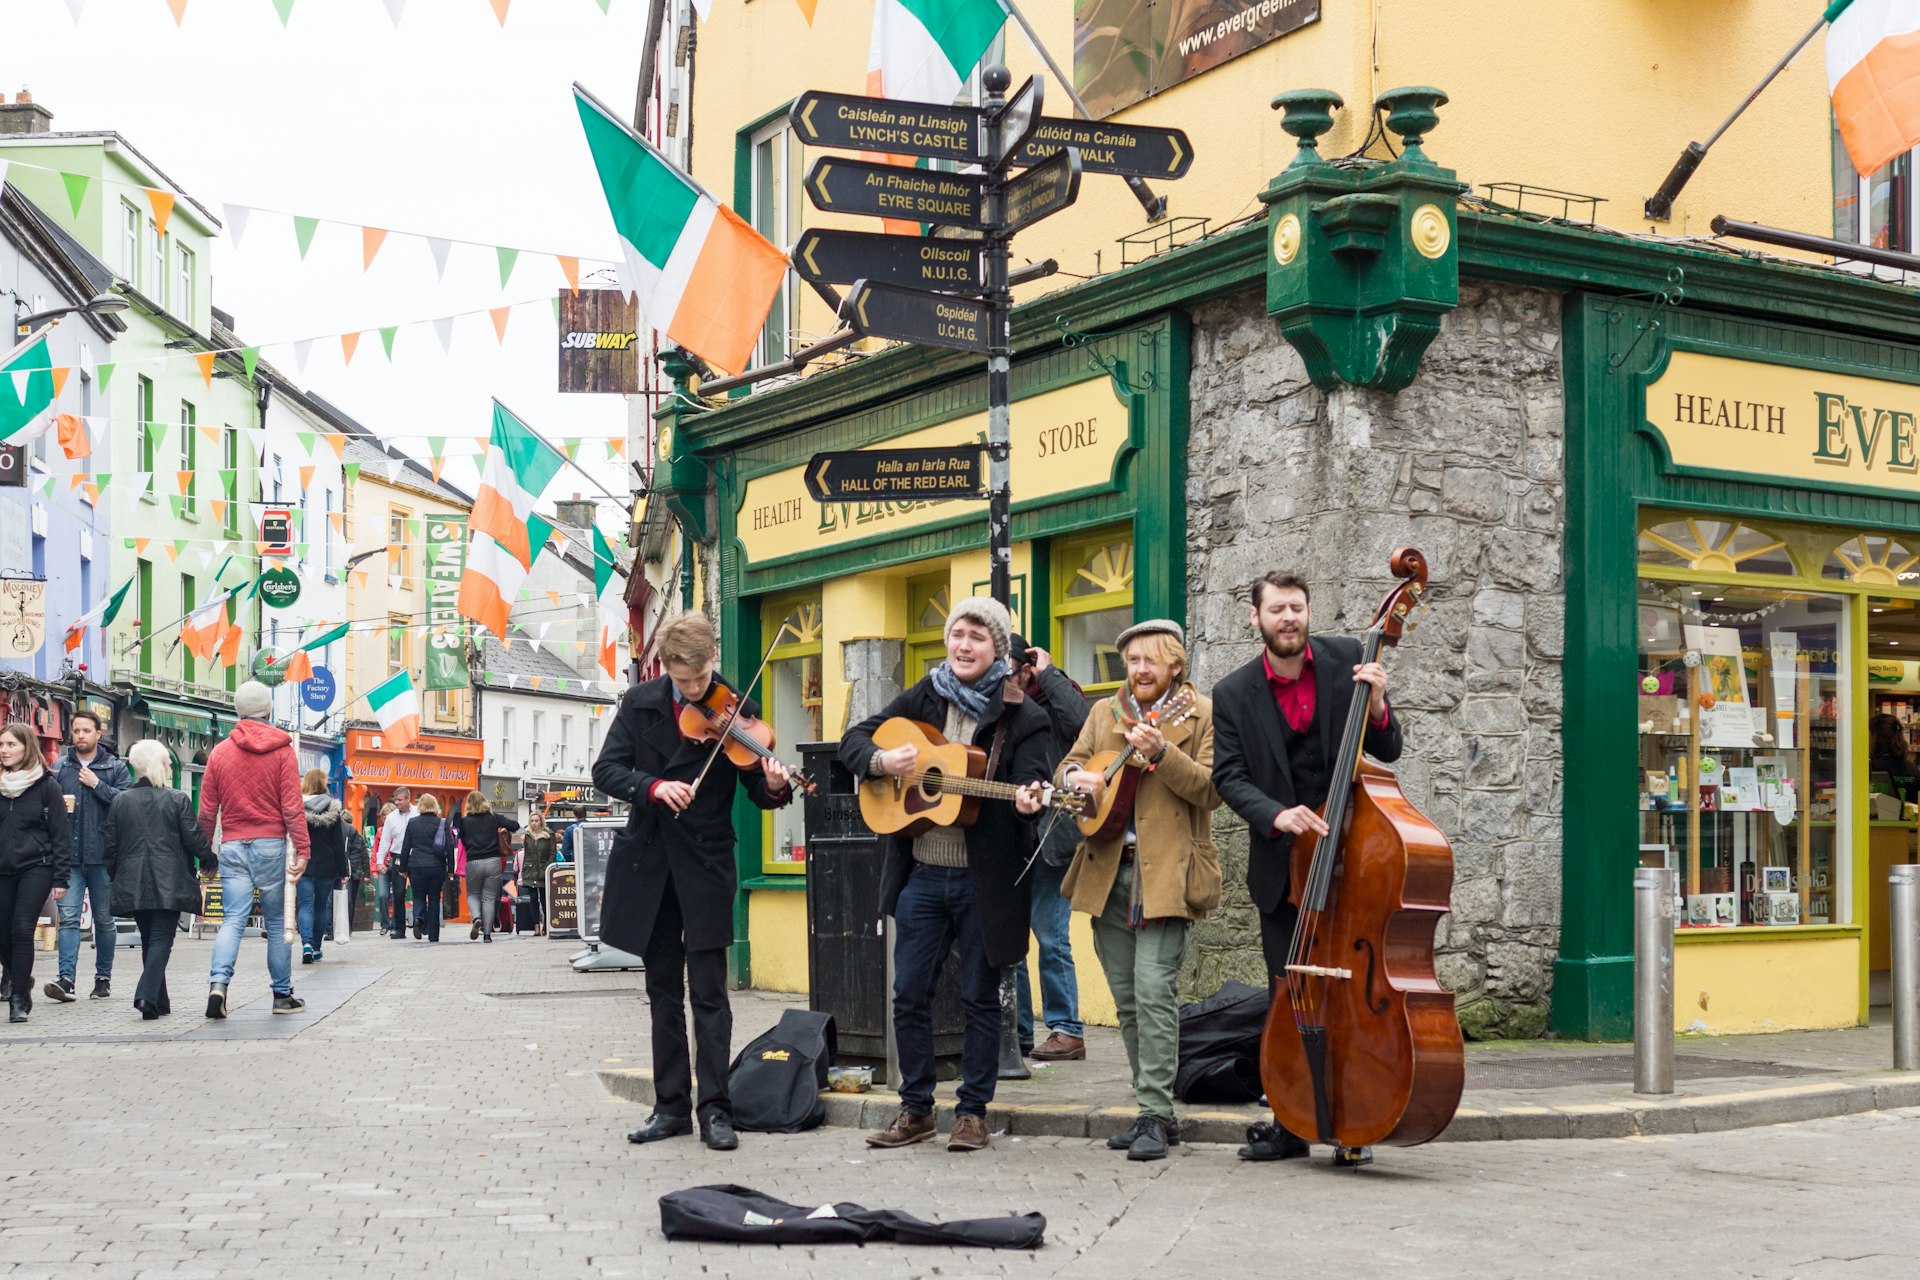 Street musicians perform in Galway City, County Galway, Ireland